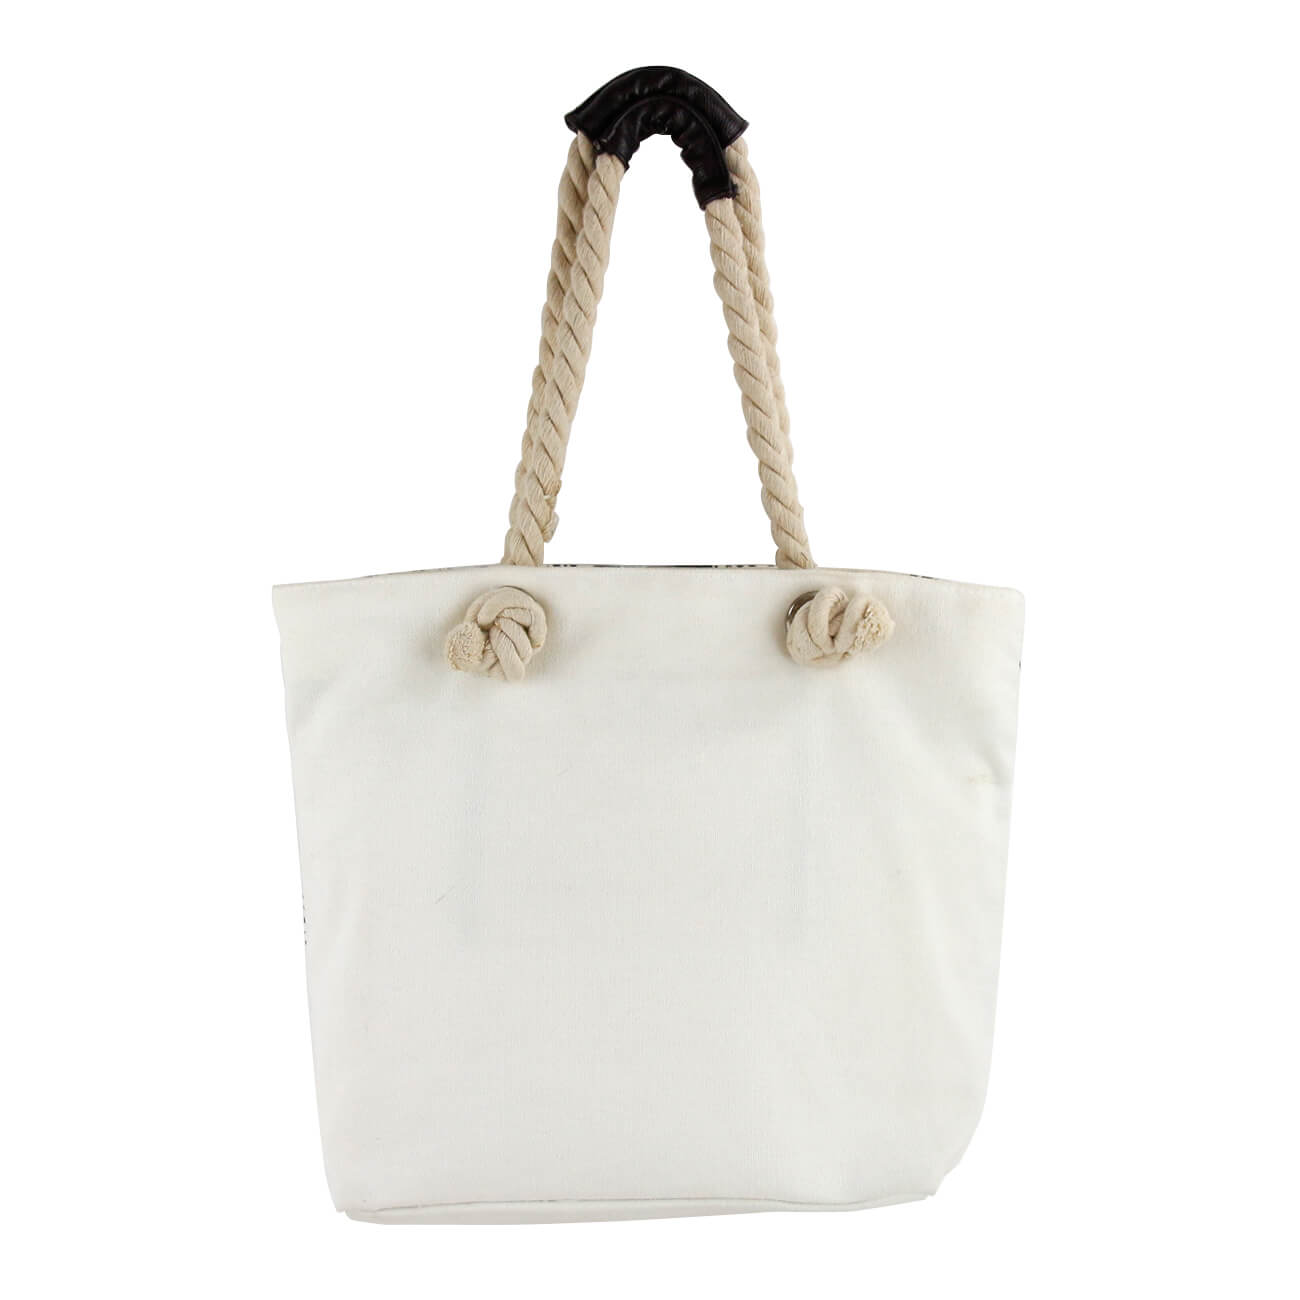 Custom Promotional Cotton Tote Bags with cotton rope handles